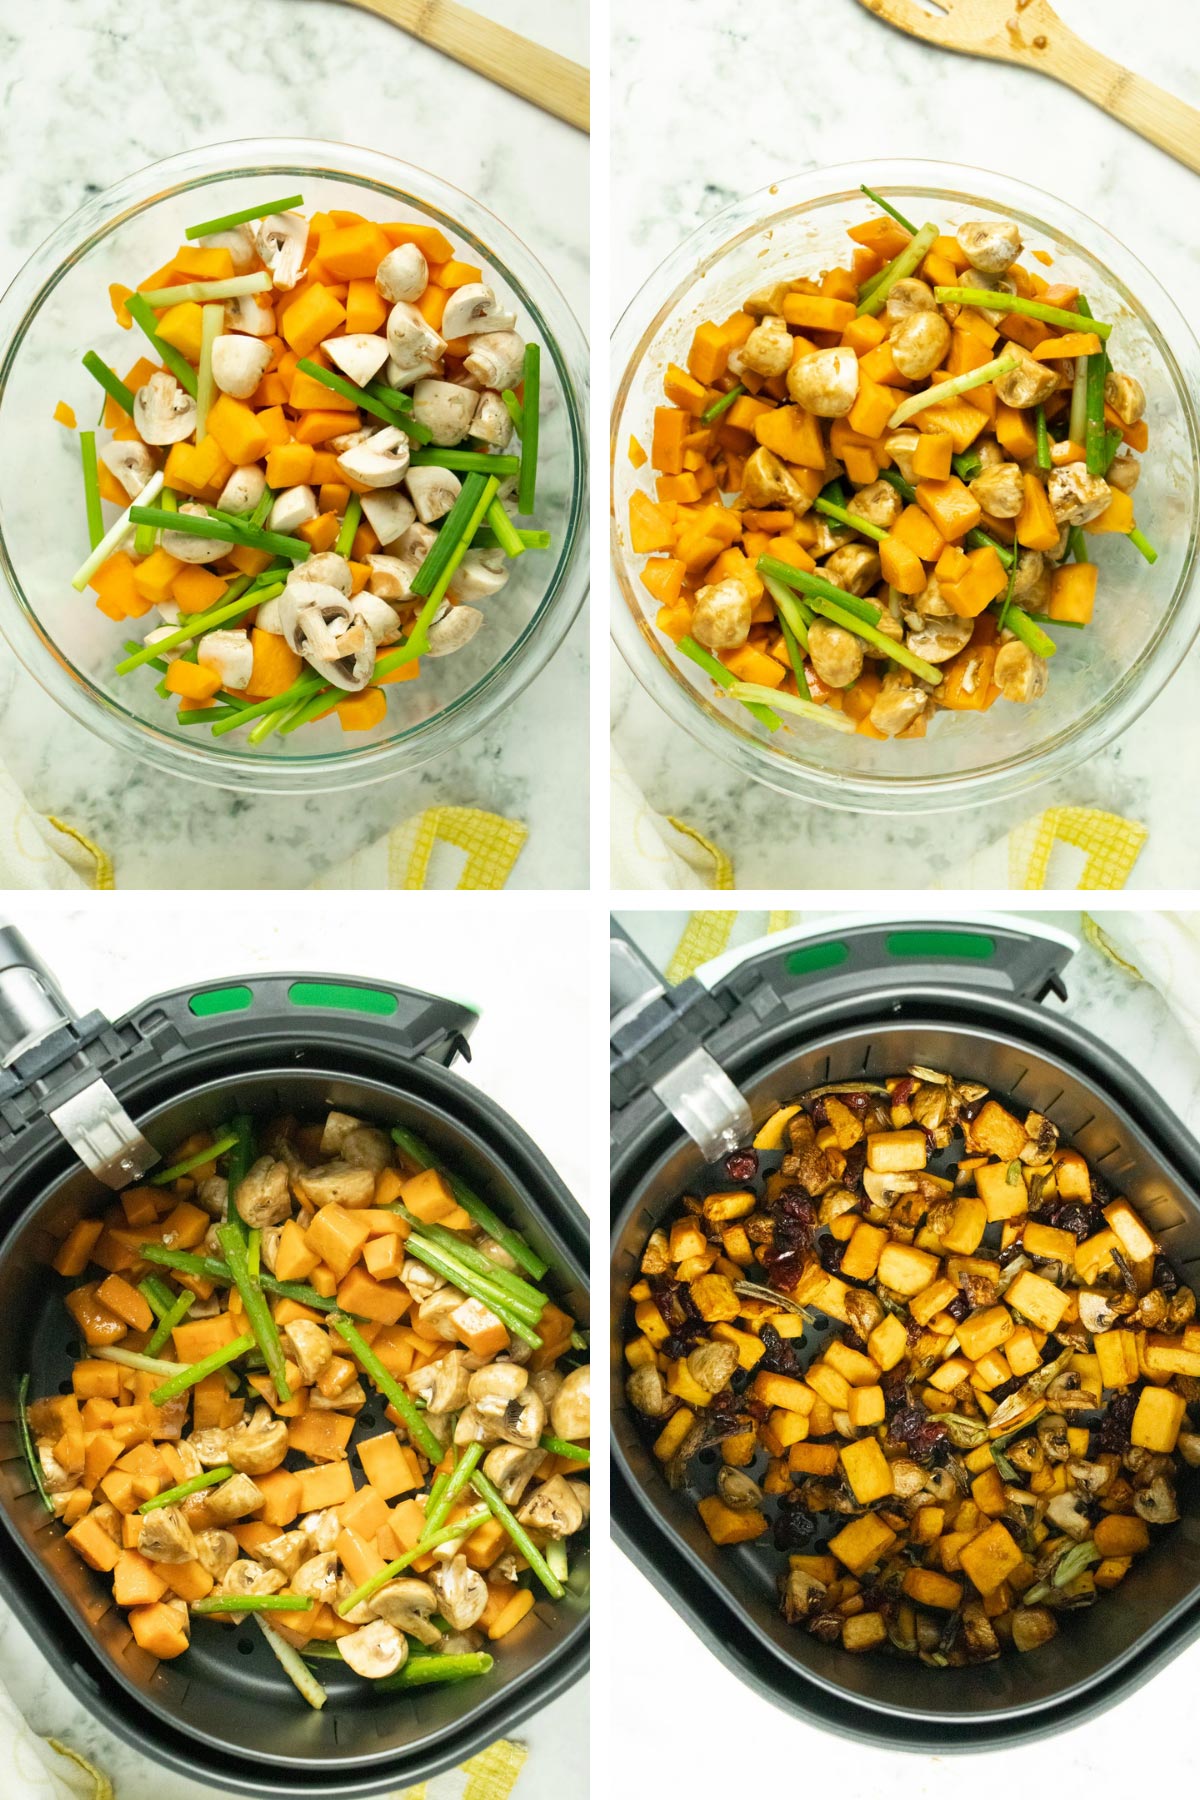 process collage showing the squash mixture before and after air frying